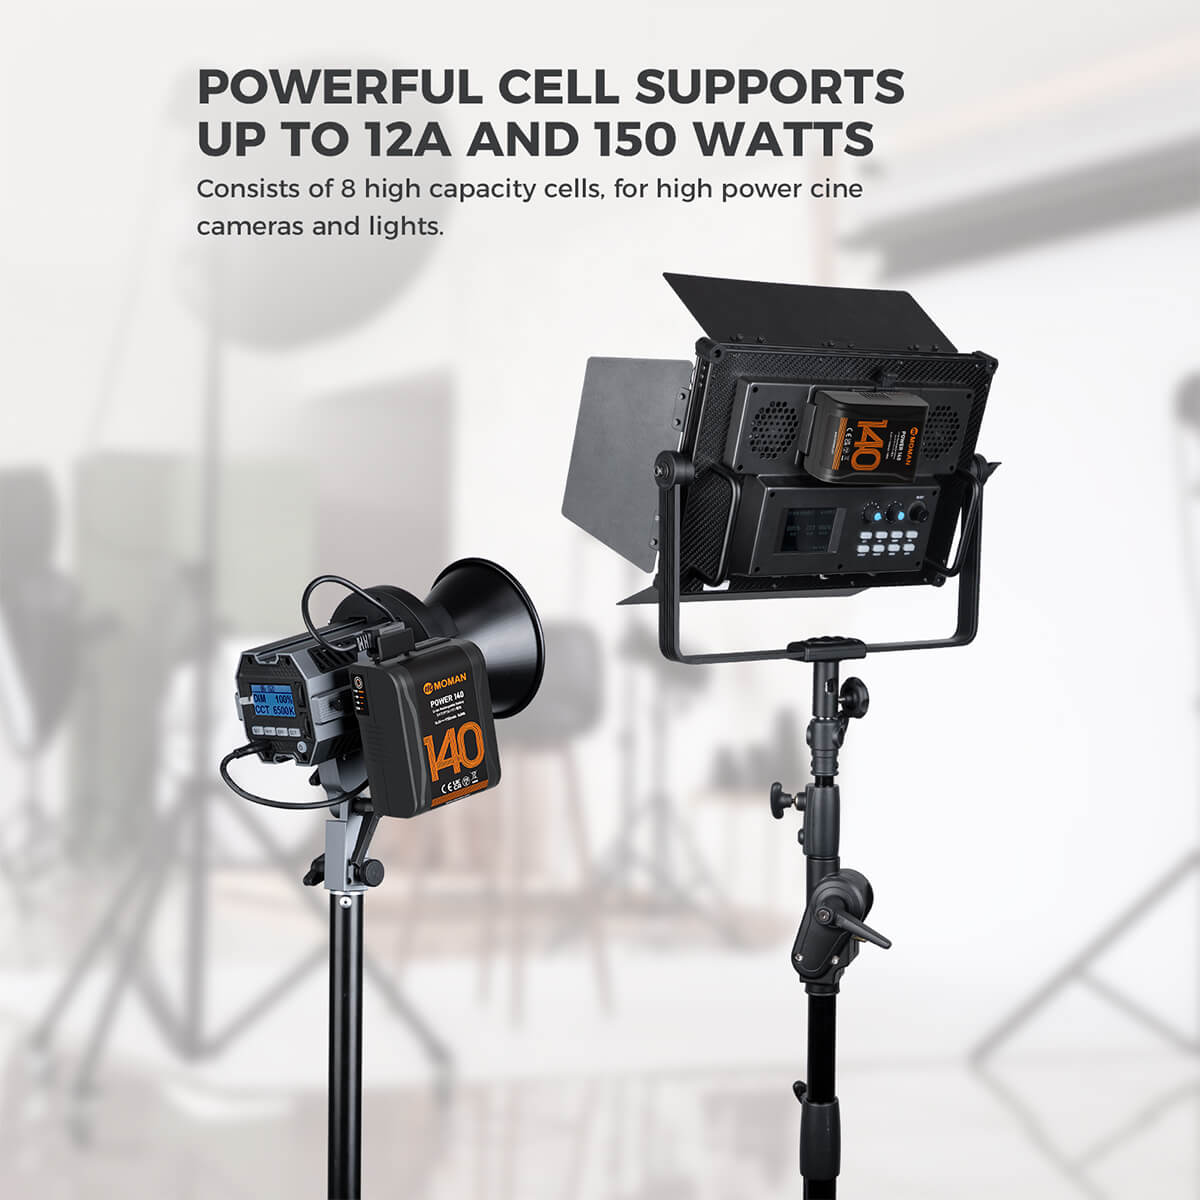 Moman Power 140 consists of 8 high capacity cells, supporting up to 12A and 1500W for lights and cameras.